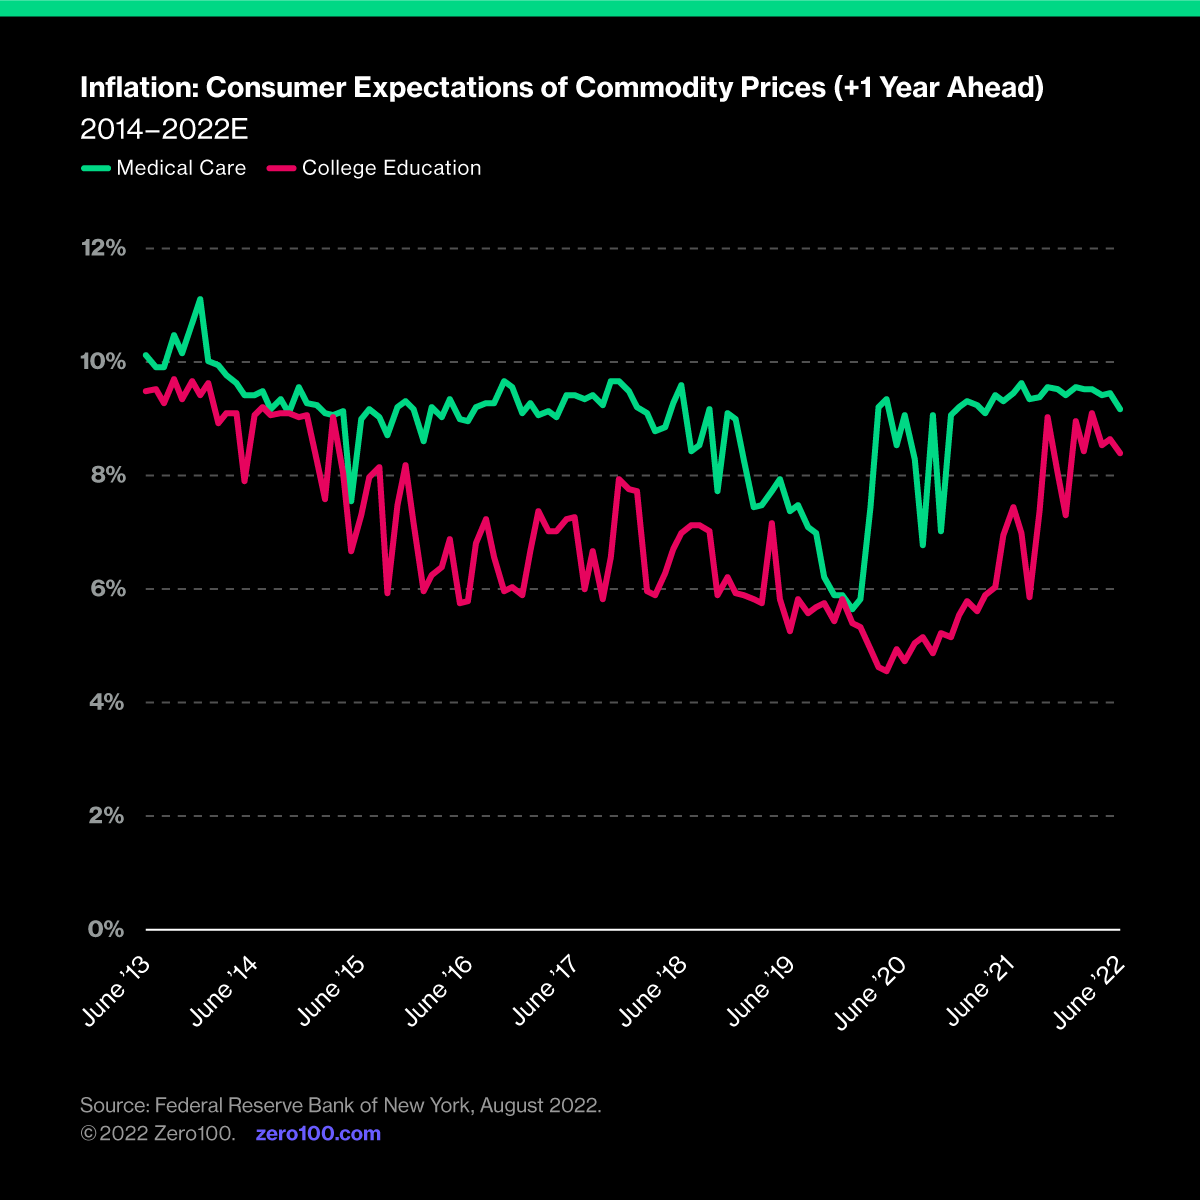 Graph depicting consumer expectation of commodity prices for medical care and college education, from 2014 until 2022. Source: Federal Reserve Bank of New York, August 2022.